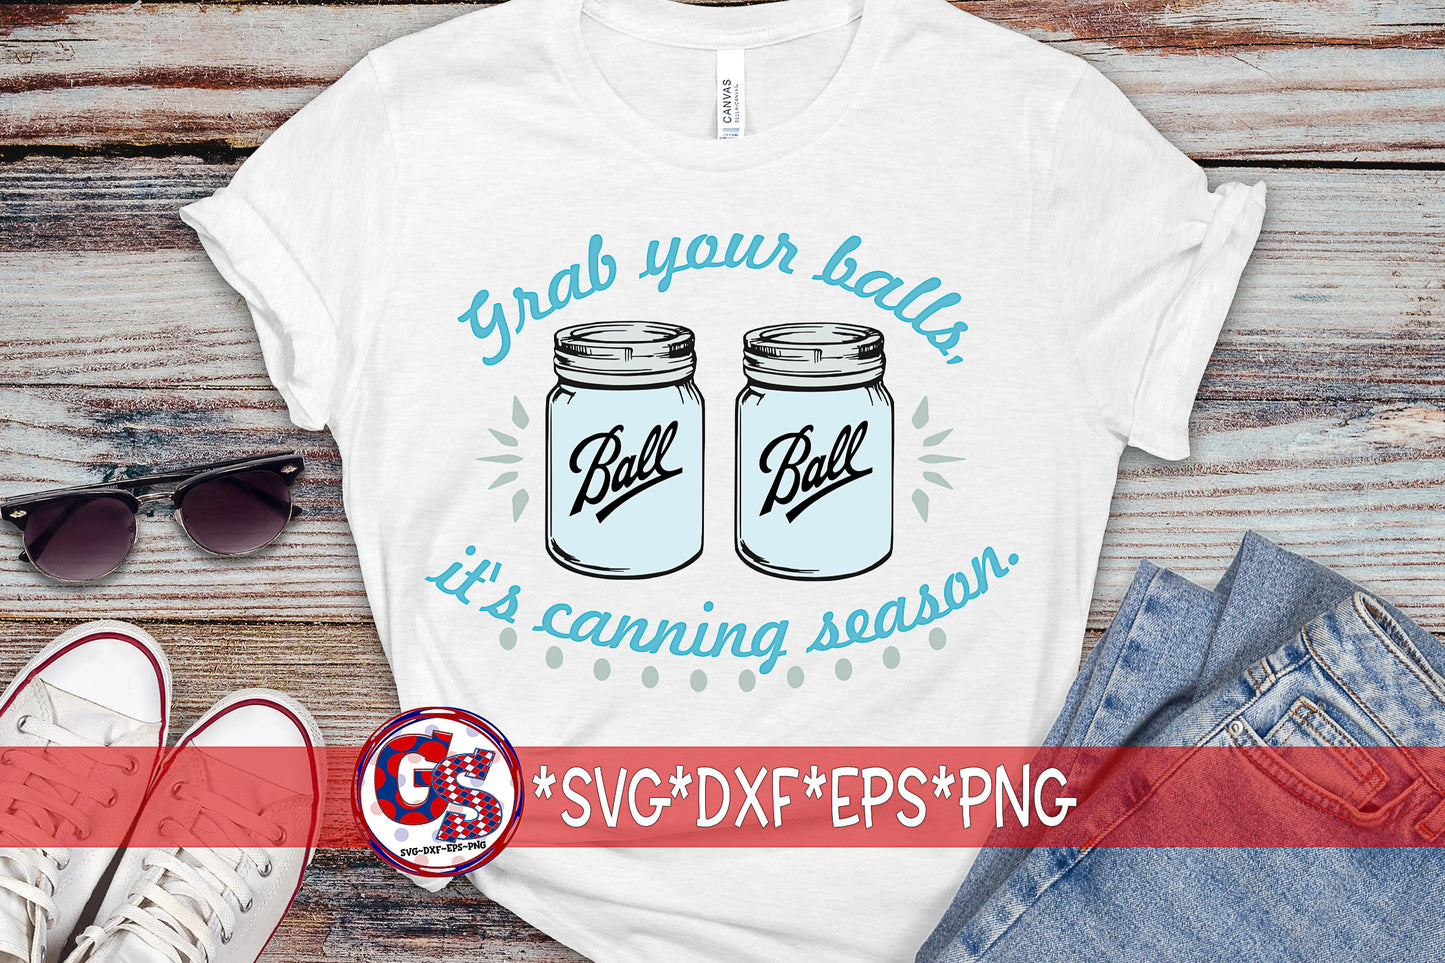 Grab Your Balls, It's Canning Season SVG DXF EPS PNG